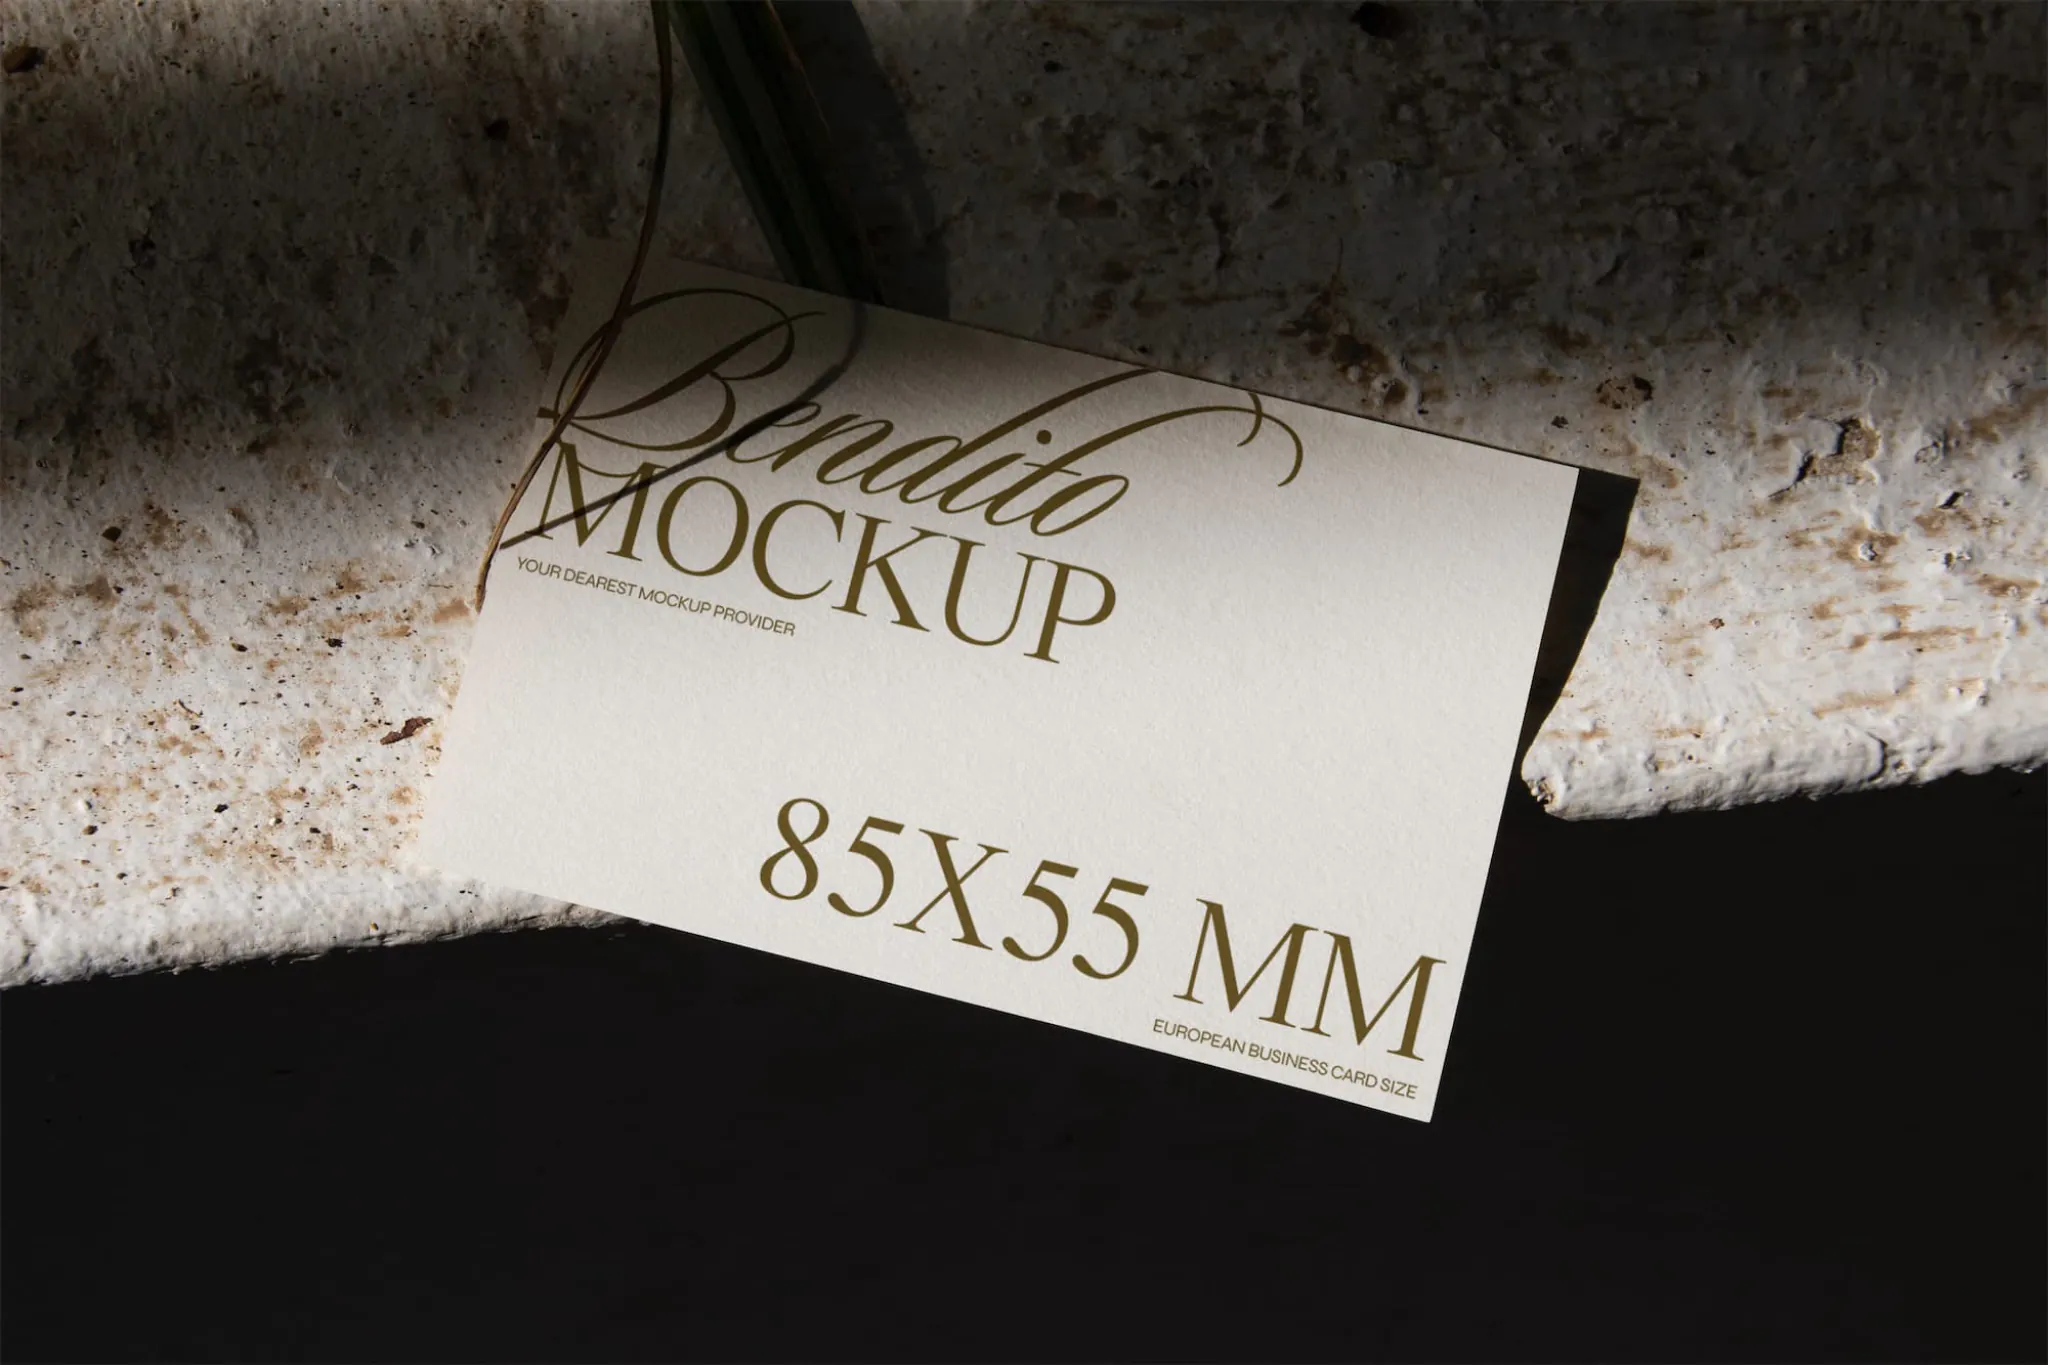 Business card mockup over rustic texture background.